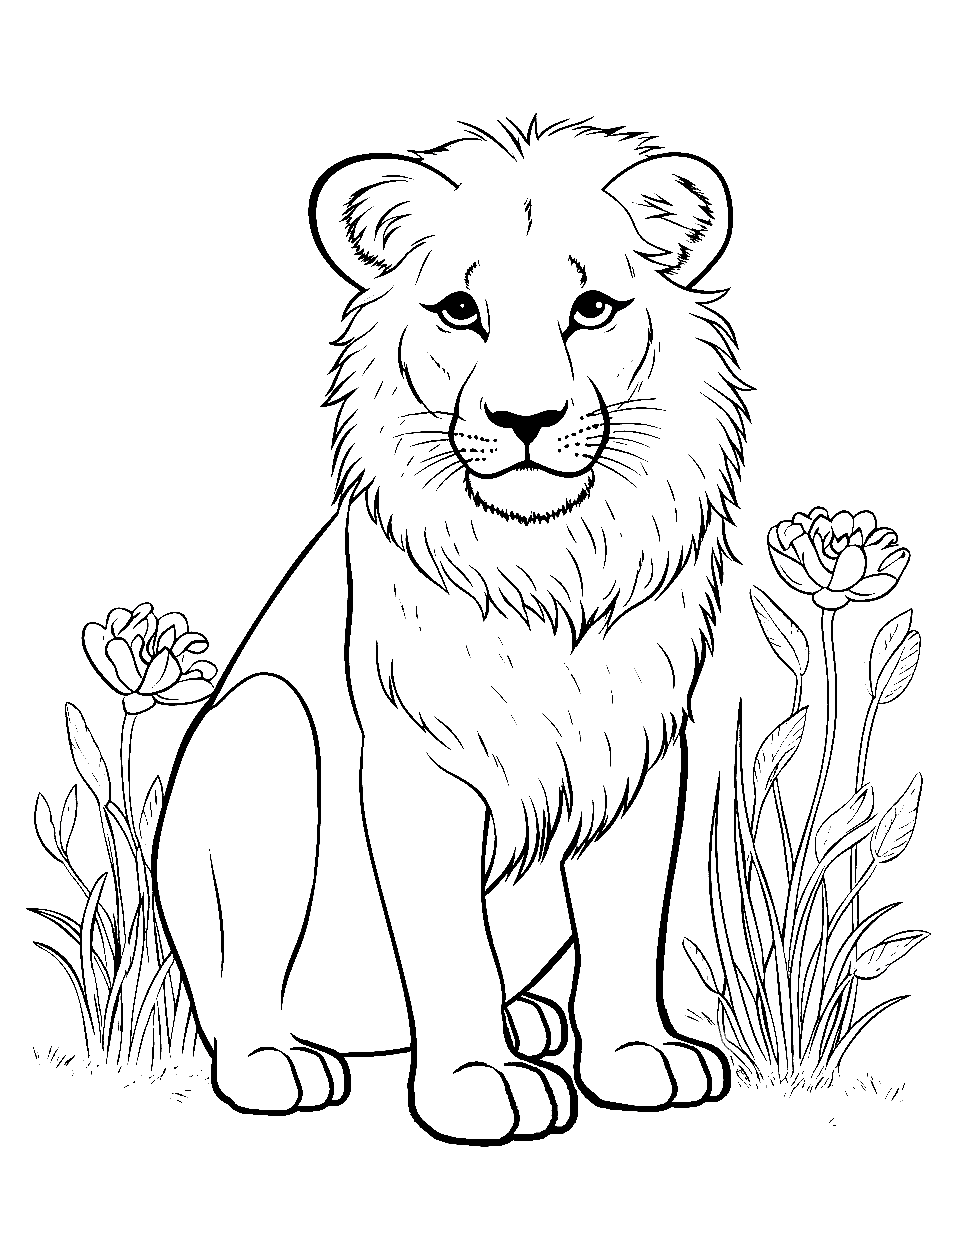 Animal Kingdom Coloring Page - A lion sitting dominantly amidst the grasslands.